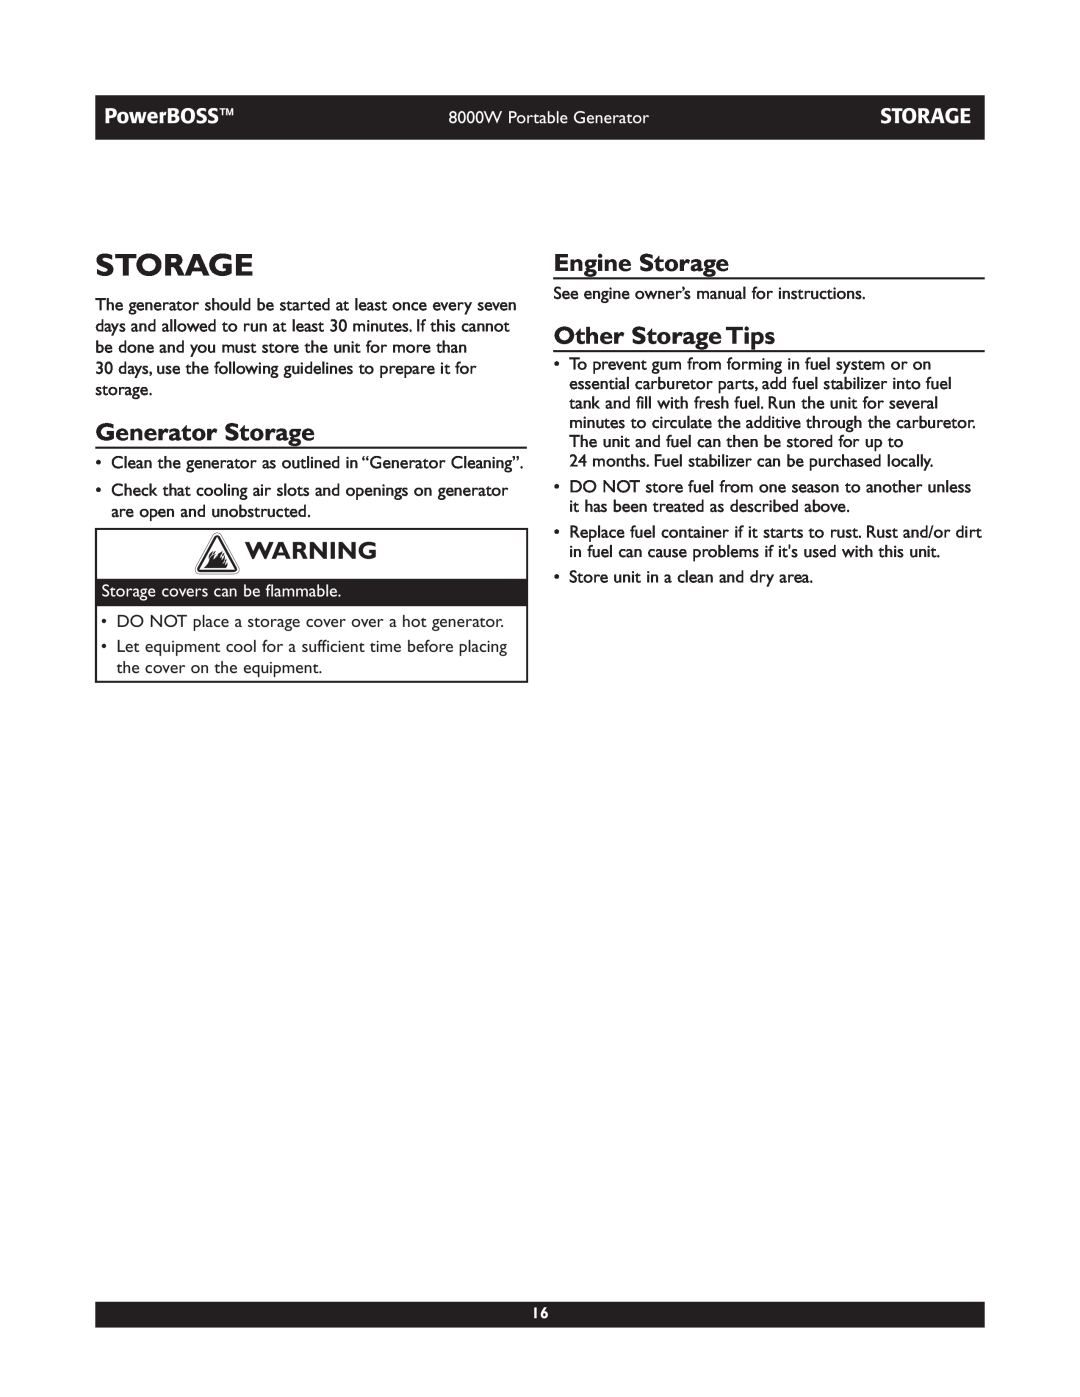 Briggs & Stratton 30228 Generator Storage, Engine Storage, Other Storage Tips, Storage covers can be flammable 